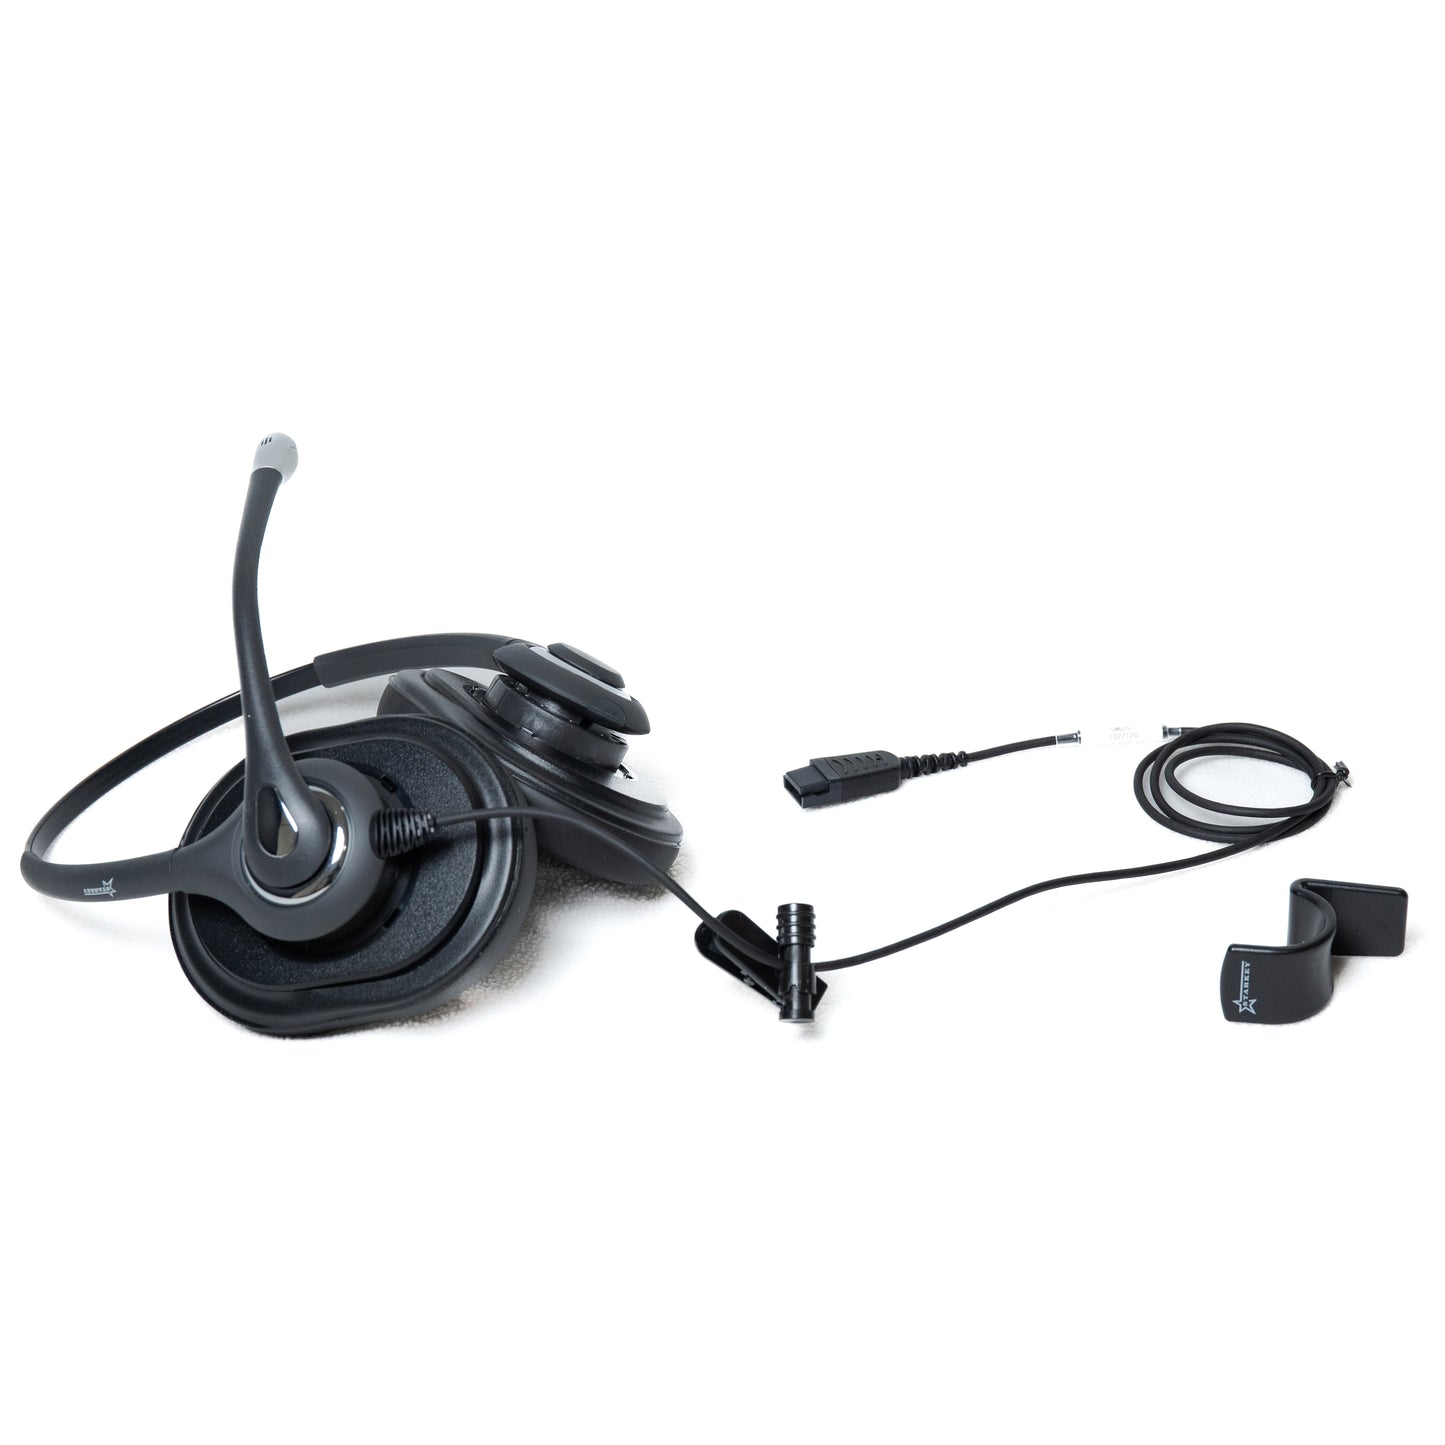 Starkey SM630-NNC Military Triple XL Ear Cushion Headset with Non-Noise Canceling